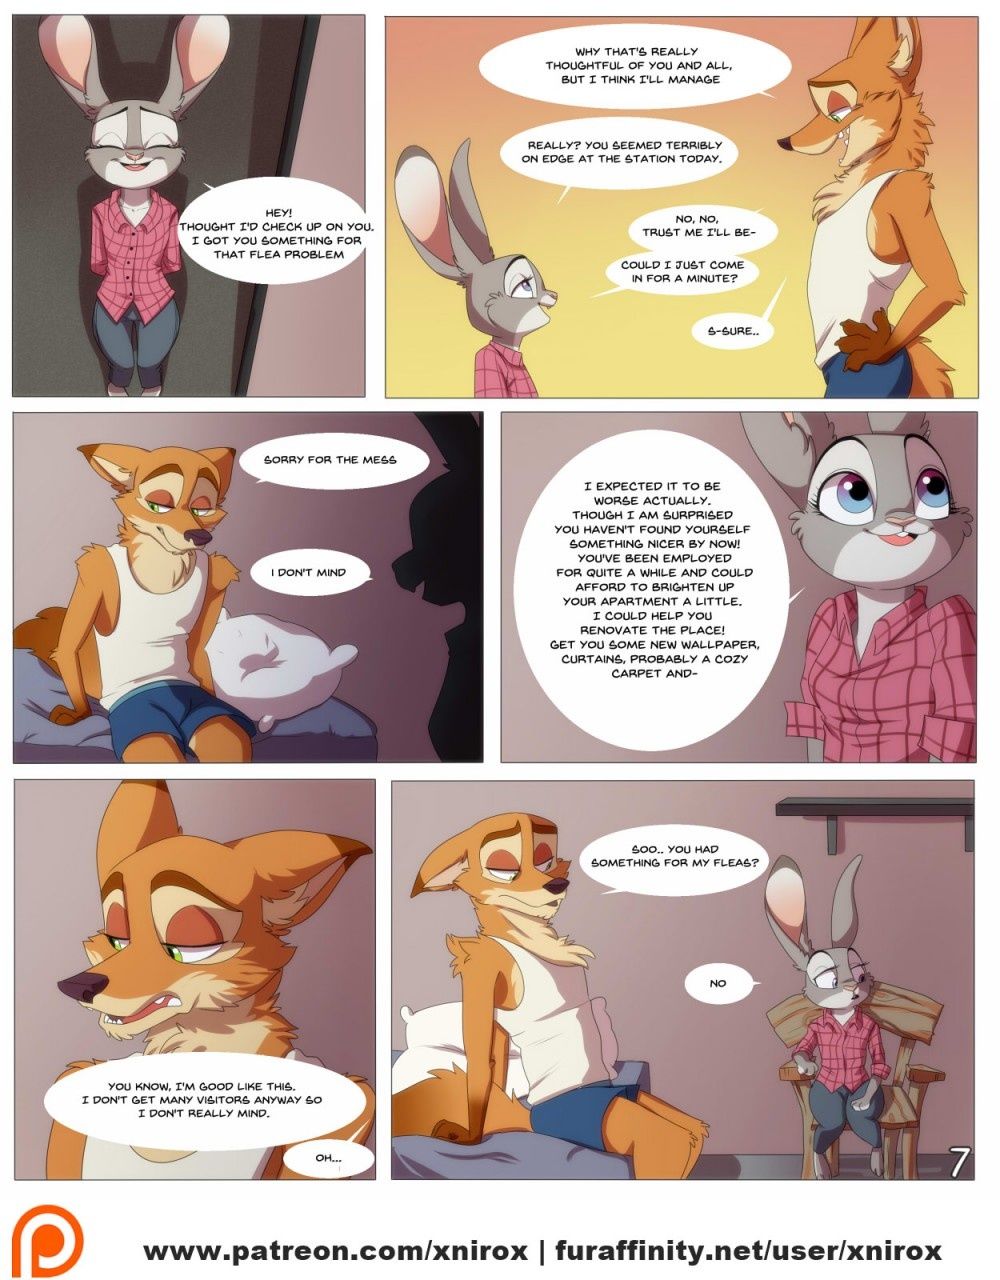 [Xnirox] Zootopia - Twitterpated, Furry Cartoon page 7